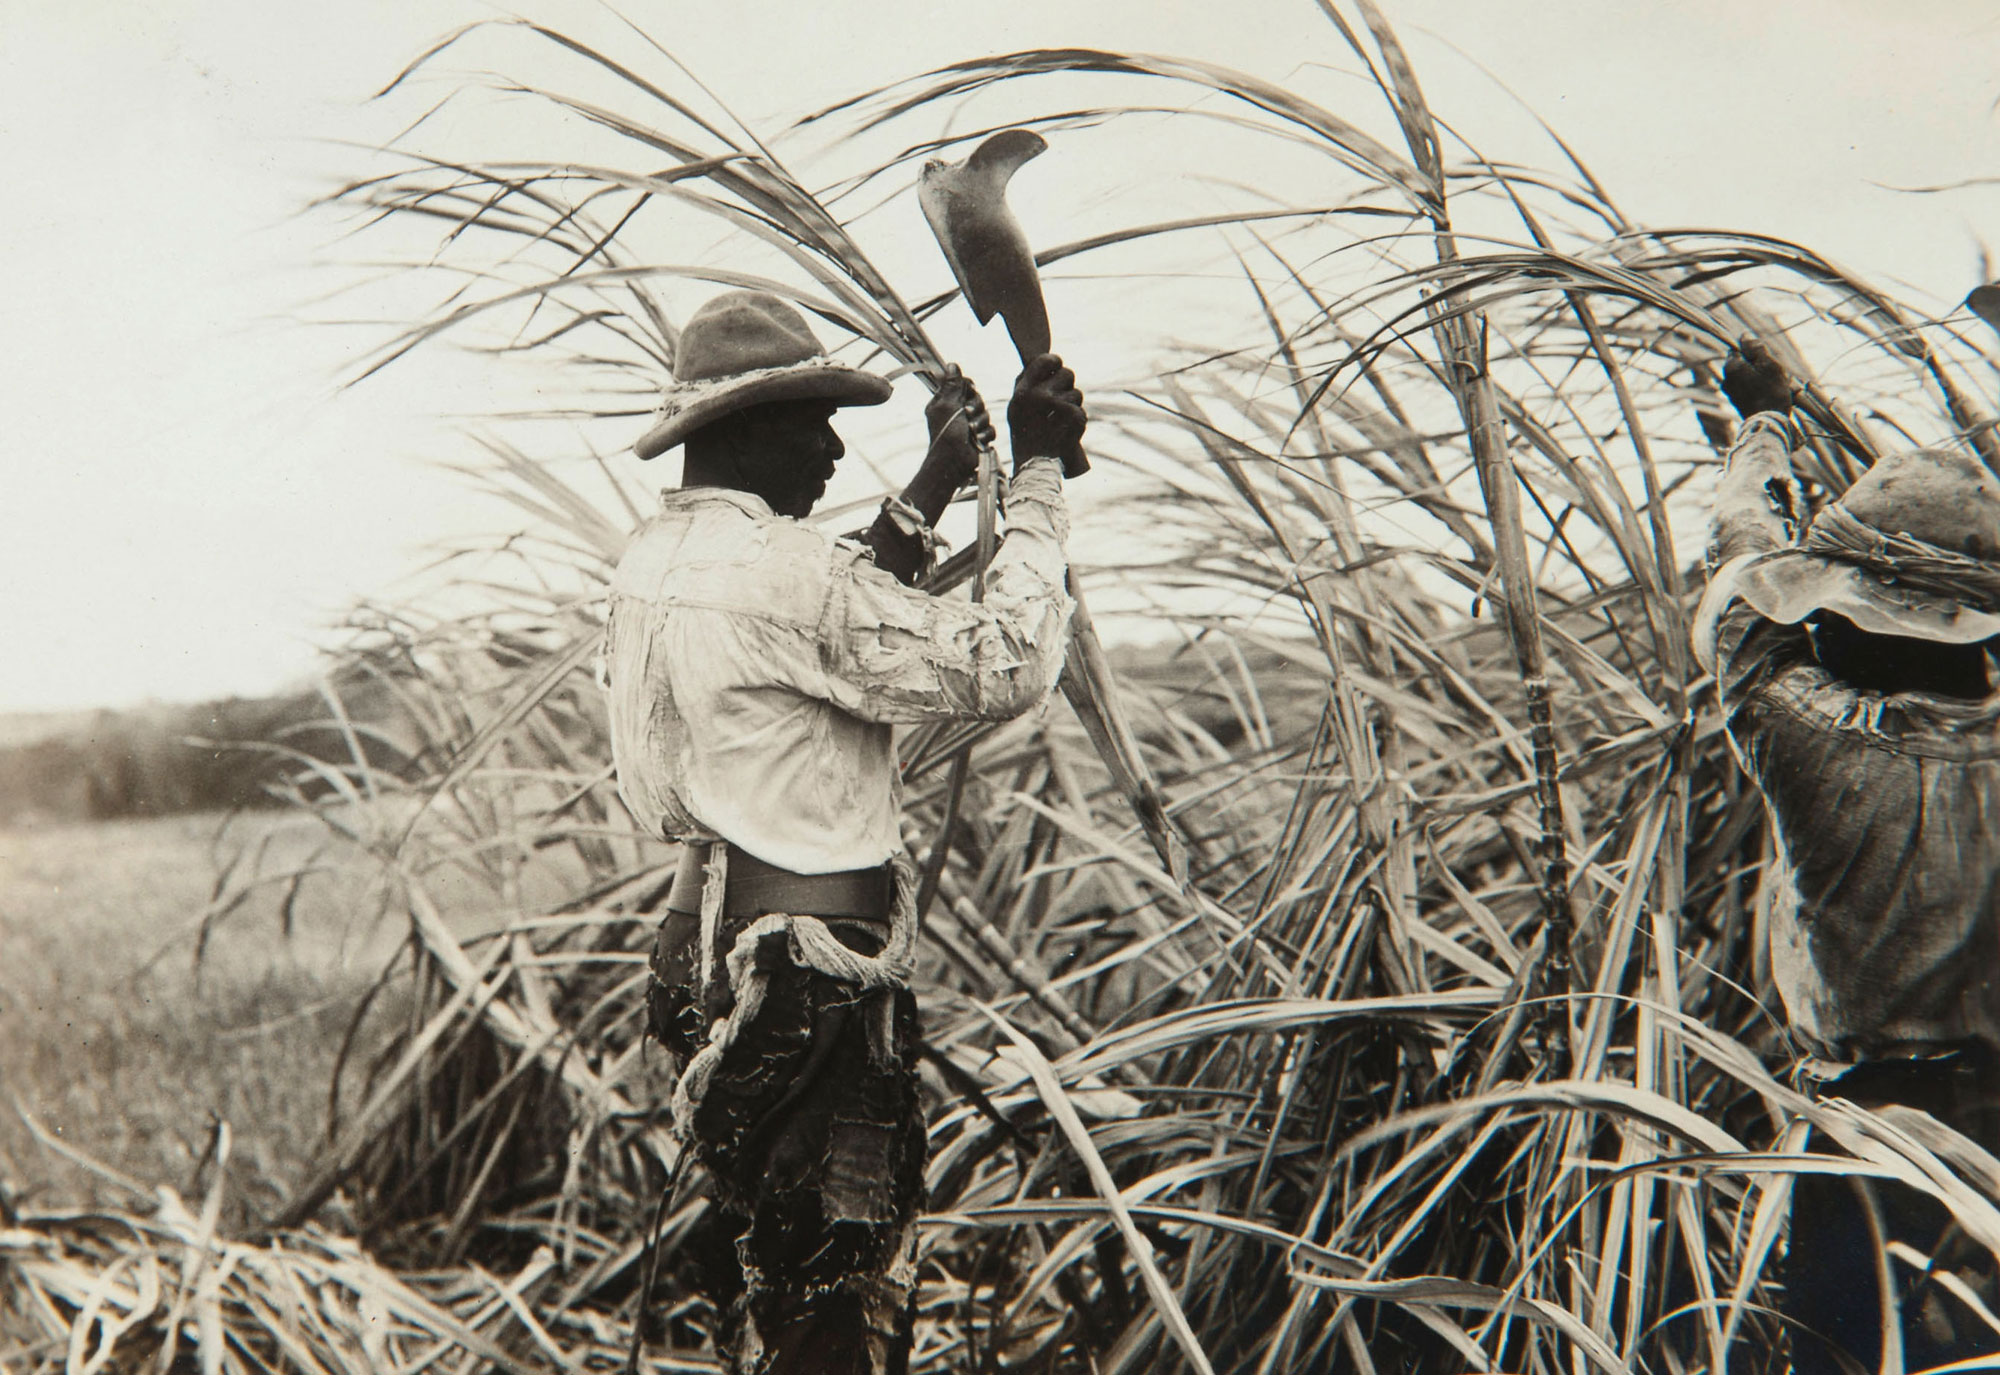 Black and white photograph of a man harvesting sugarcane using a cane knife on Barbados. The image shows a Black man in a long-sleeved white shirt, long pants, and a wide-brimmed hat holding up a cane knife in his right hand and holding a sugarcane stalk with his left, apparently about to cut it. Another man in the right foreground can be seen holding a sugarcane stalk, and is similarly attired to the first man.